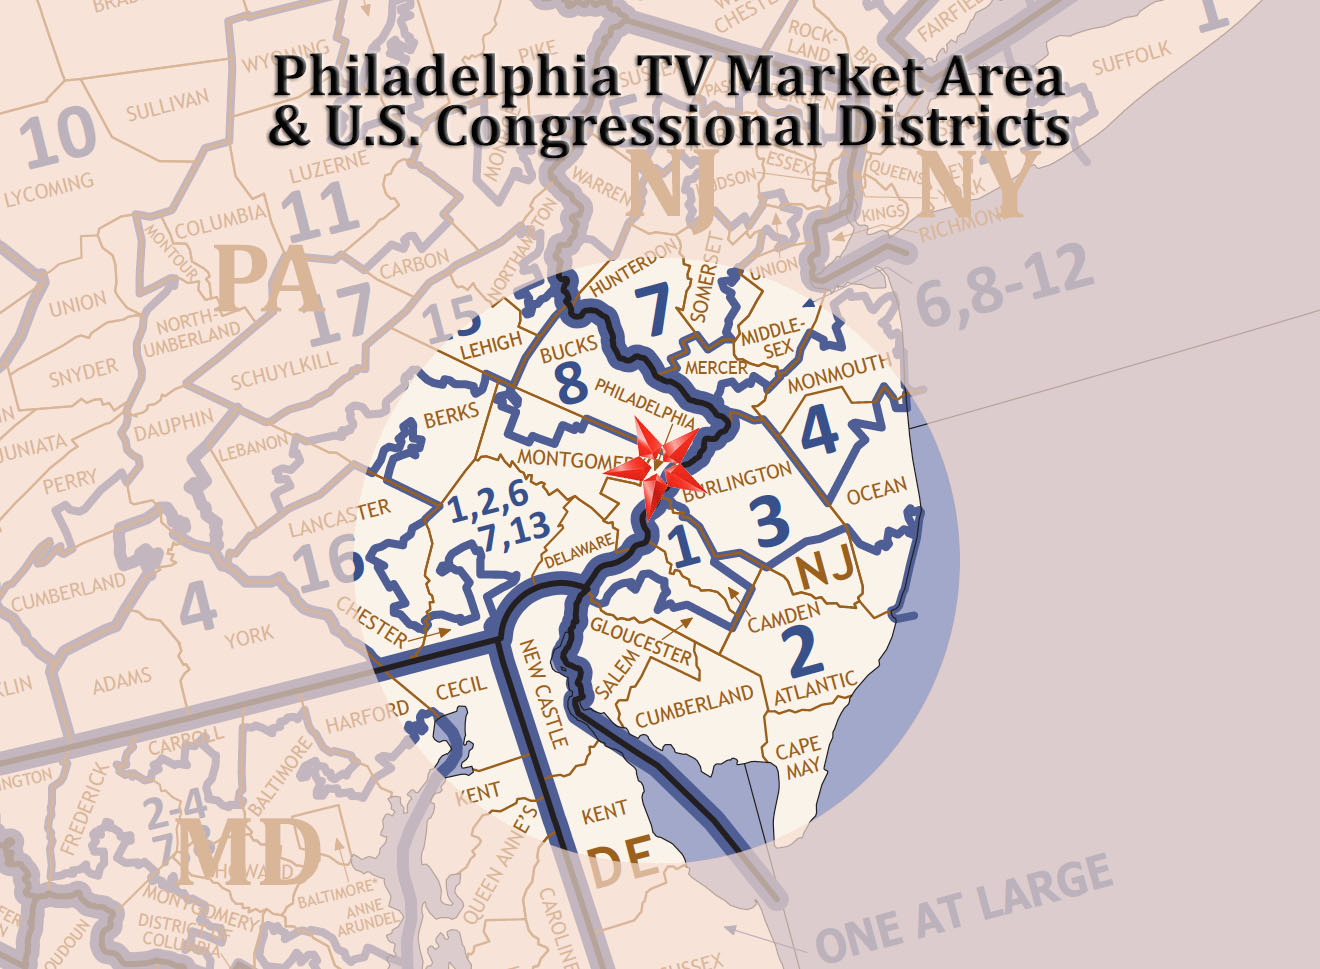 Philly TV Market Area